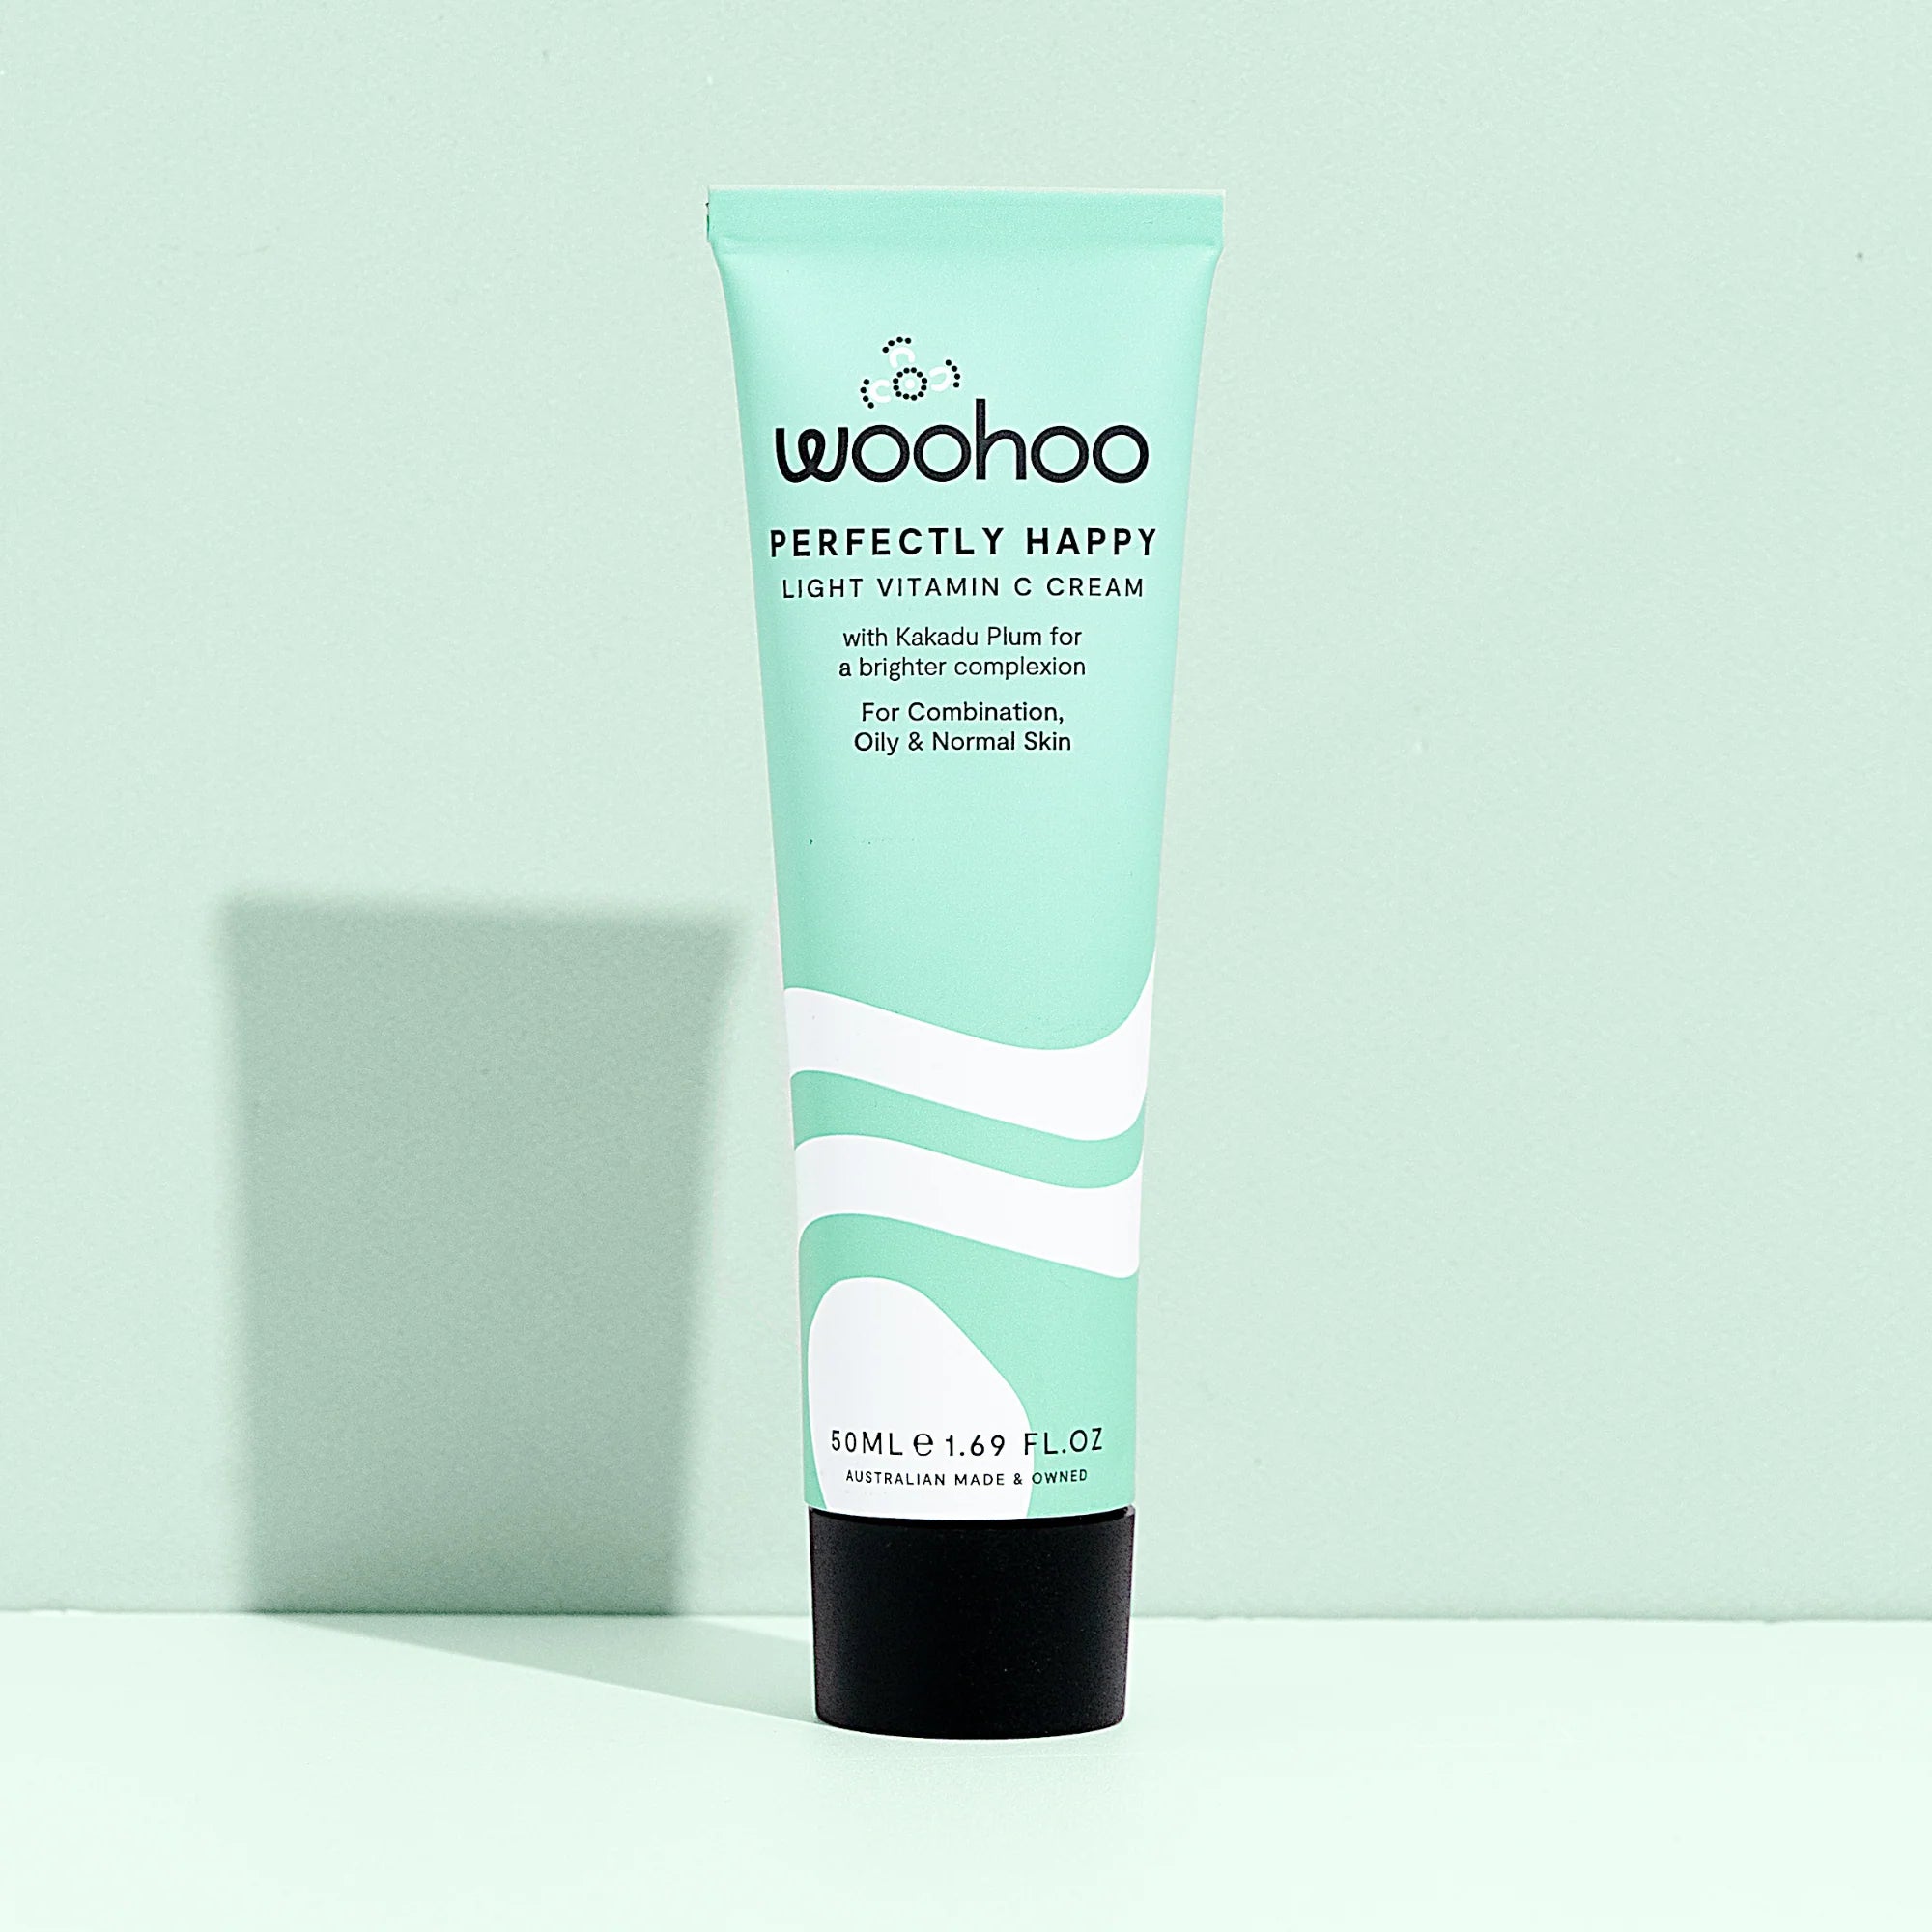 Image of the Woohoo Perfectly Happy Light Vitamin C Cream tube on a light green background